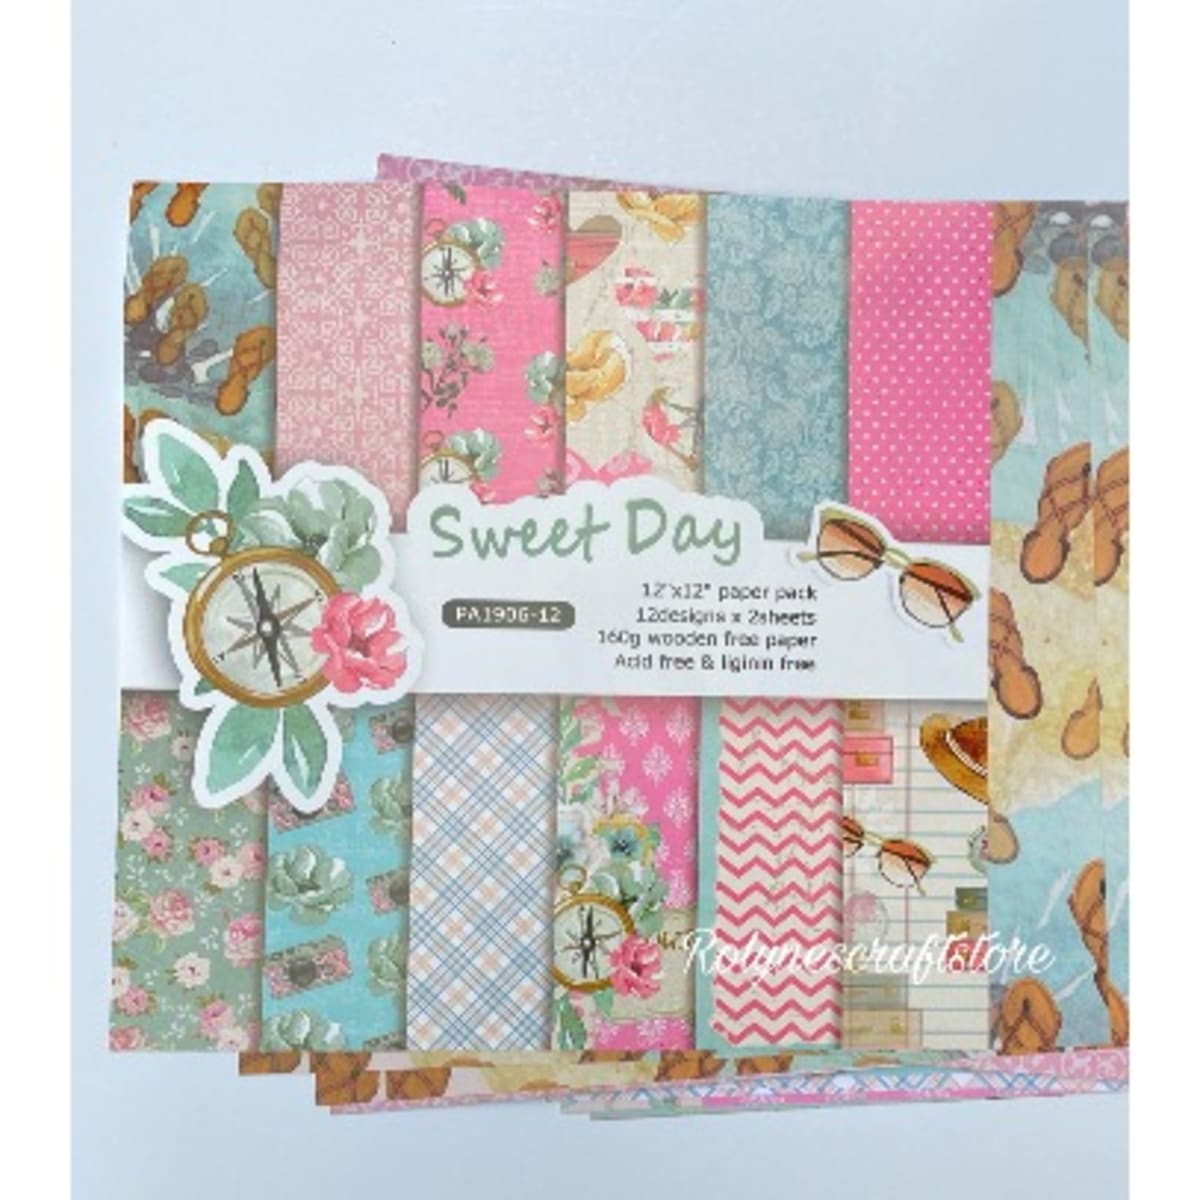 Patterned Card For Scrap Booking , Envelops And Gift Cards